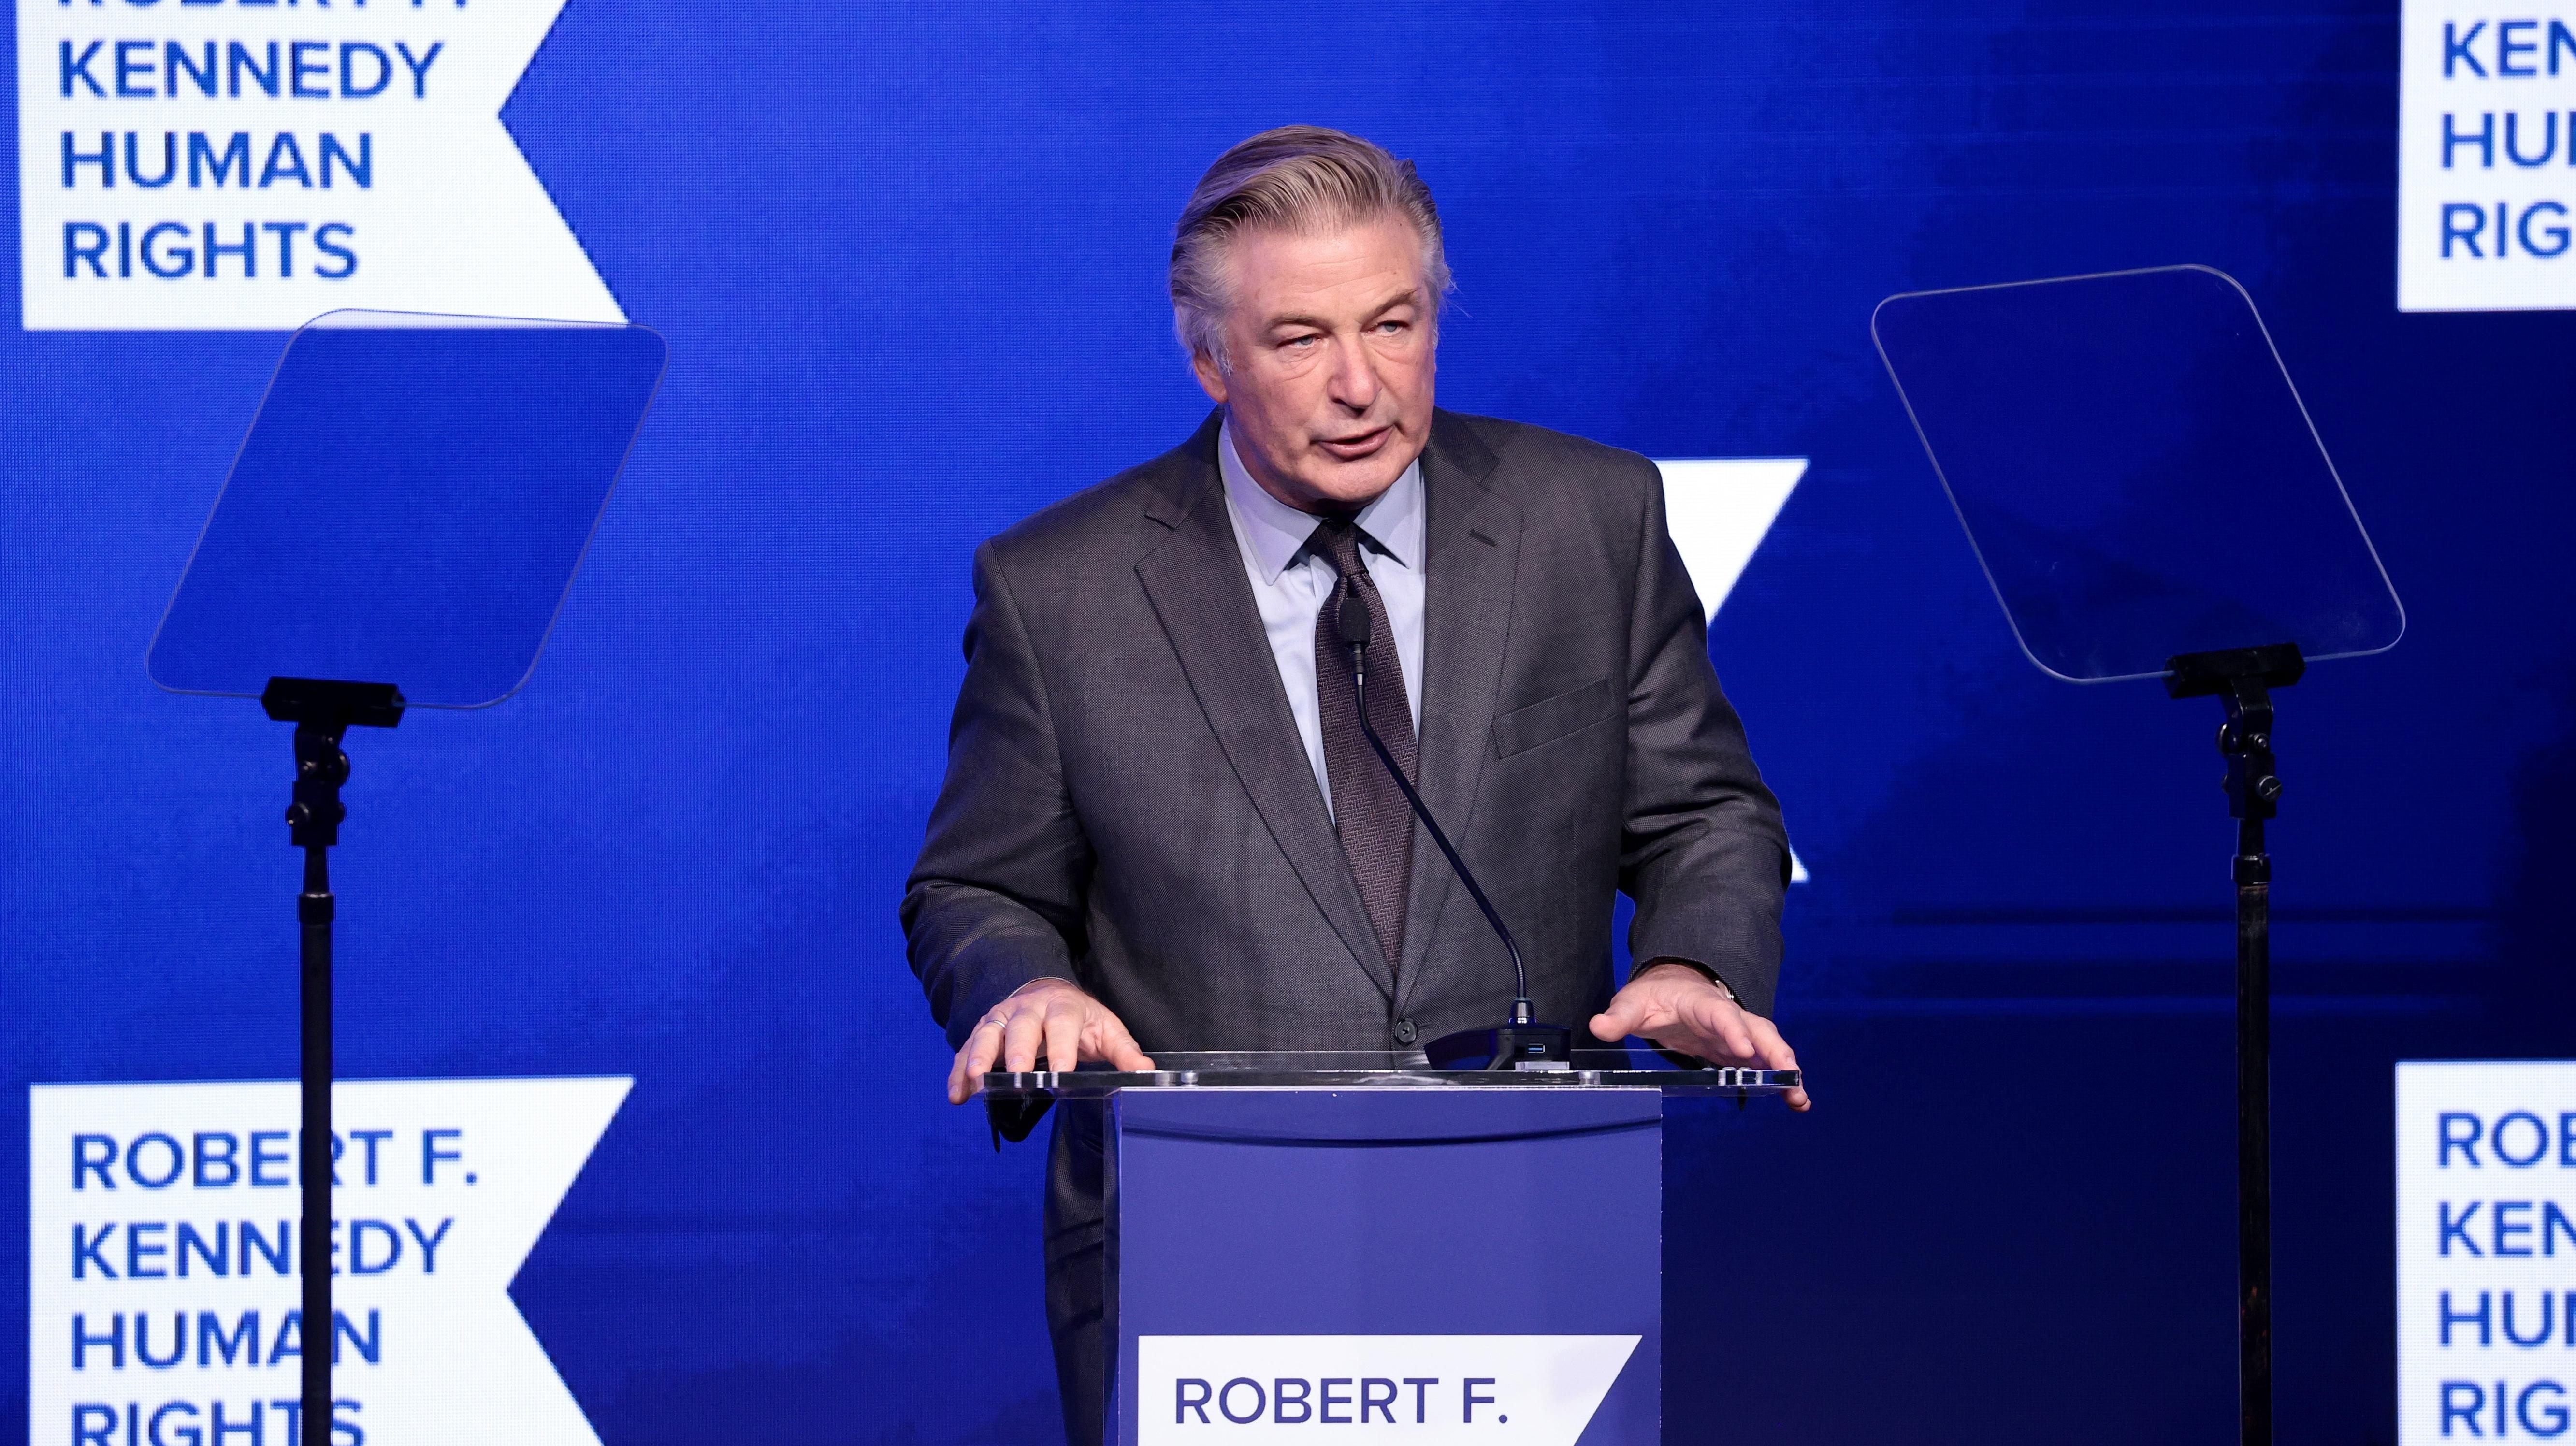 Alec Baldwin pushed to finish Rust to “honor Halyna Hutchins’s memory and talent”